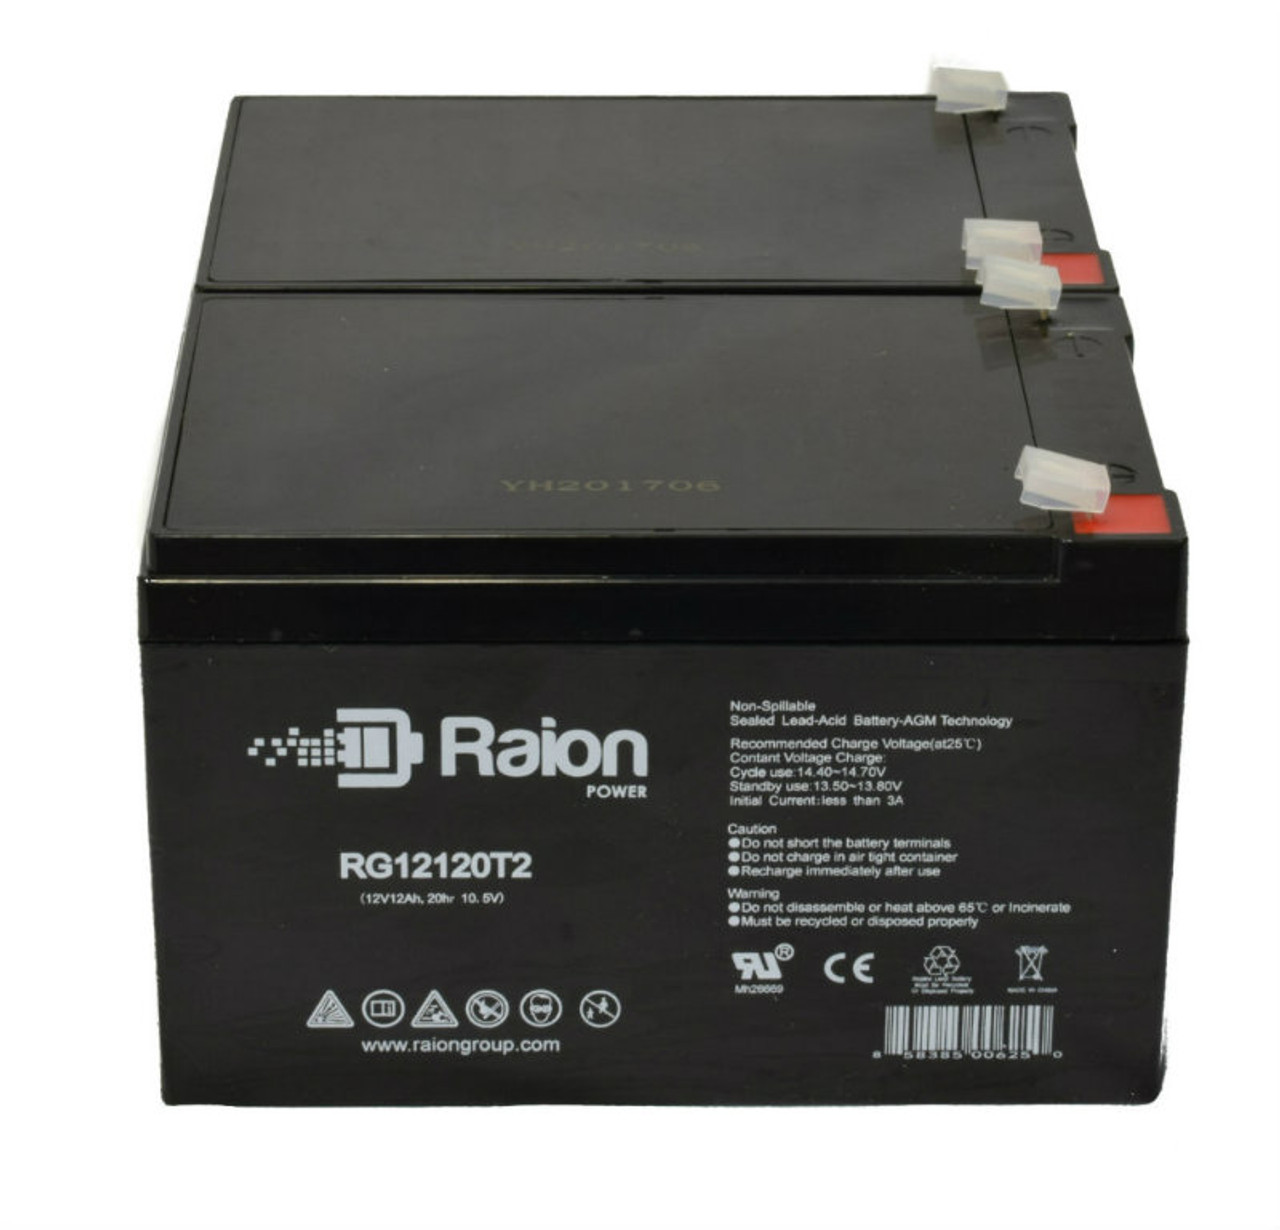 Raion Power 12V 12Ah Non-Spillable Compatible Replacement Battery for SunStone Power SPT12-14 - (2 Pack)